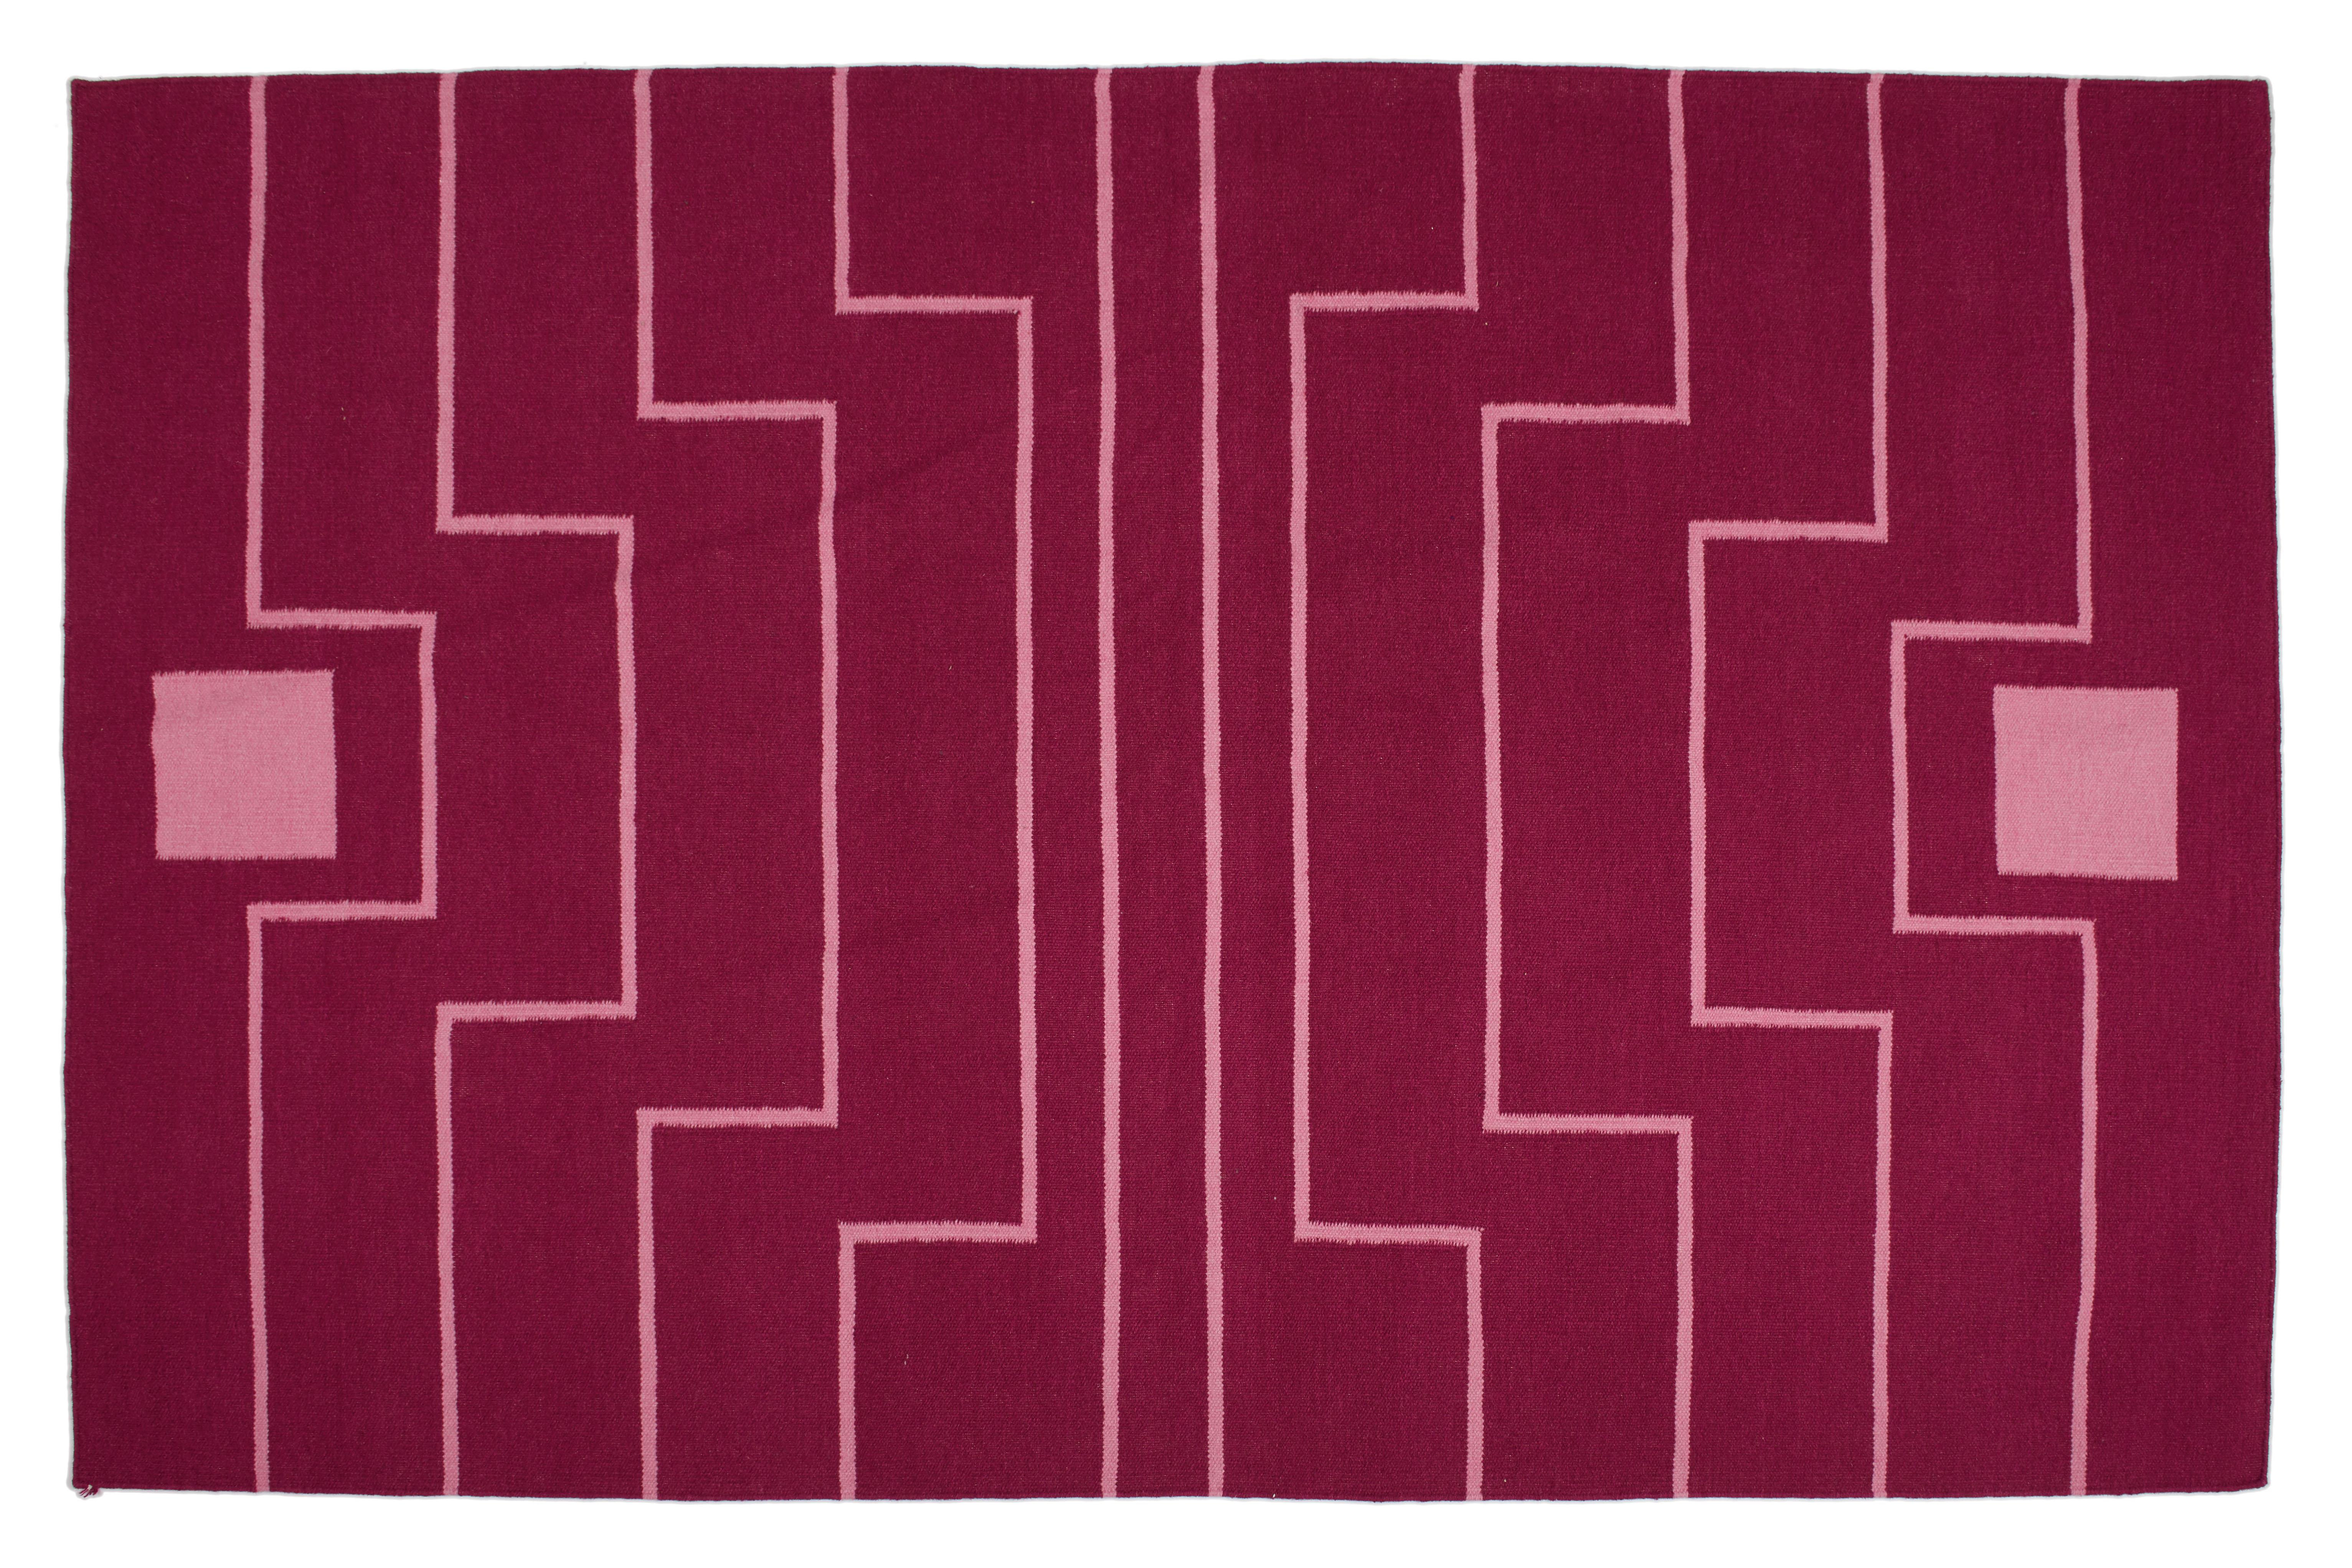 Indian Tribal Inspired Flat-Woven Dhurrie Red Maroon Pink Graphic Rug 5'x8'